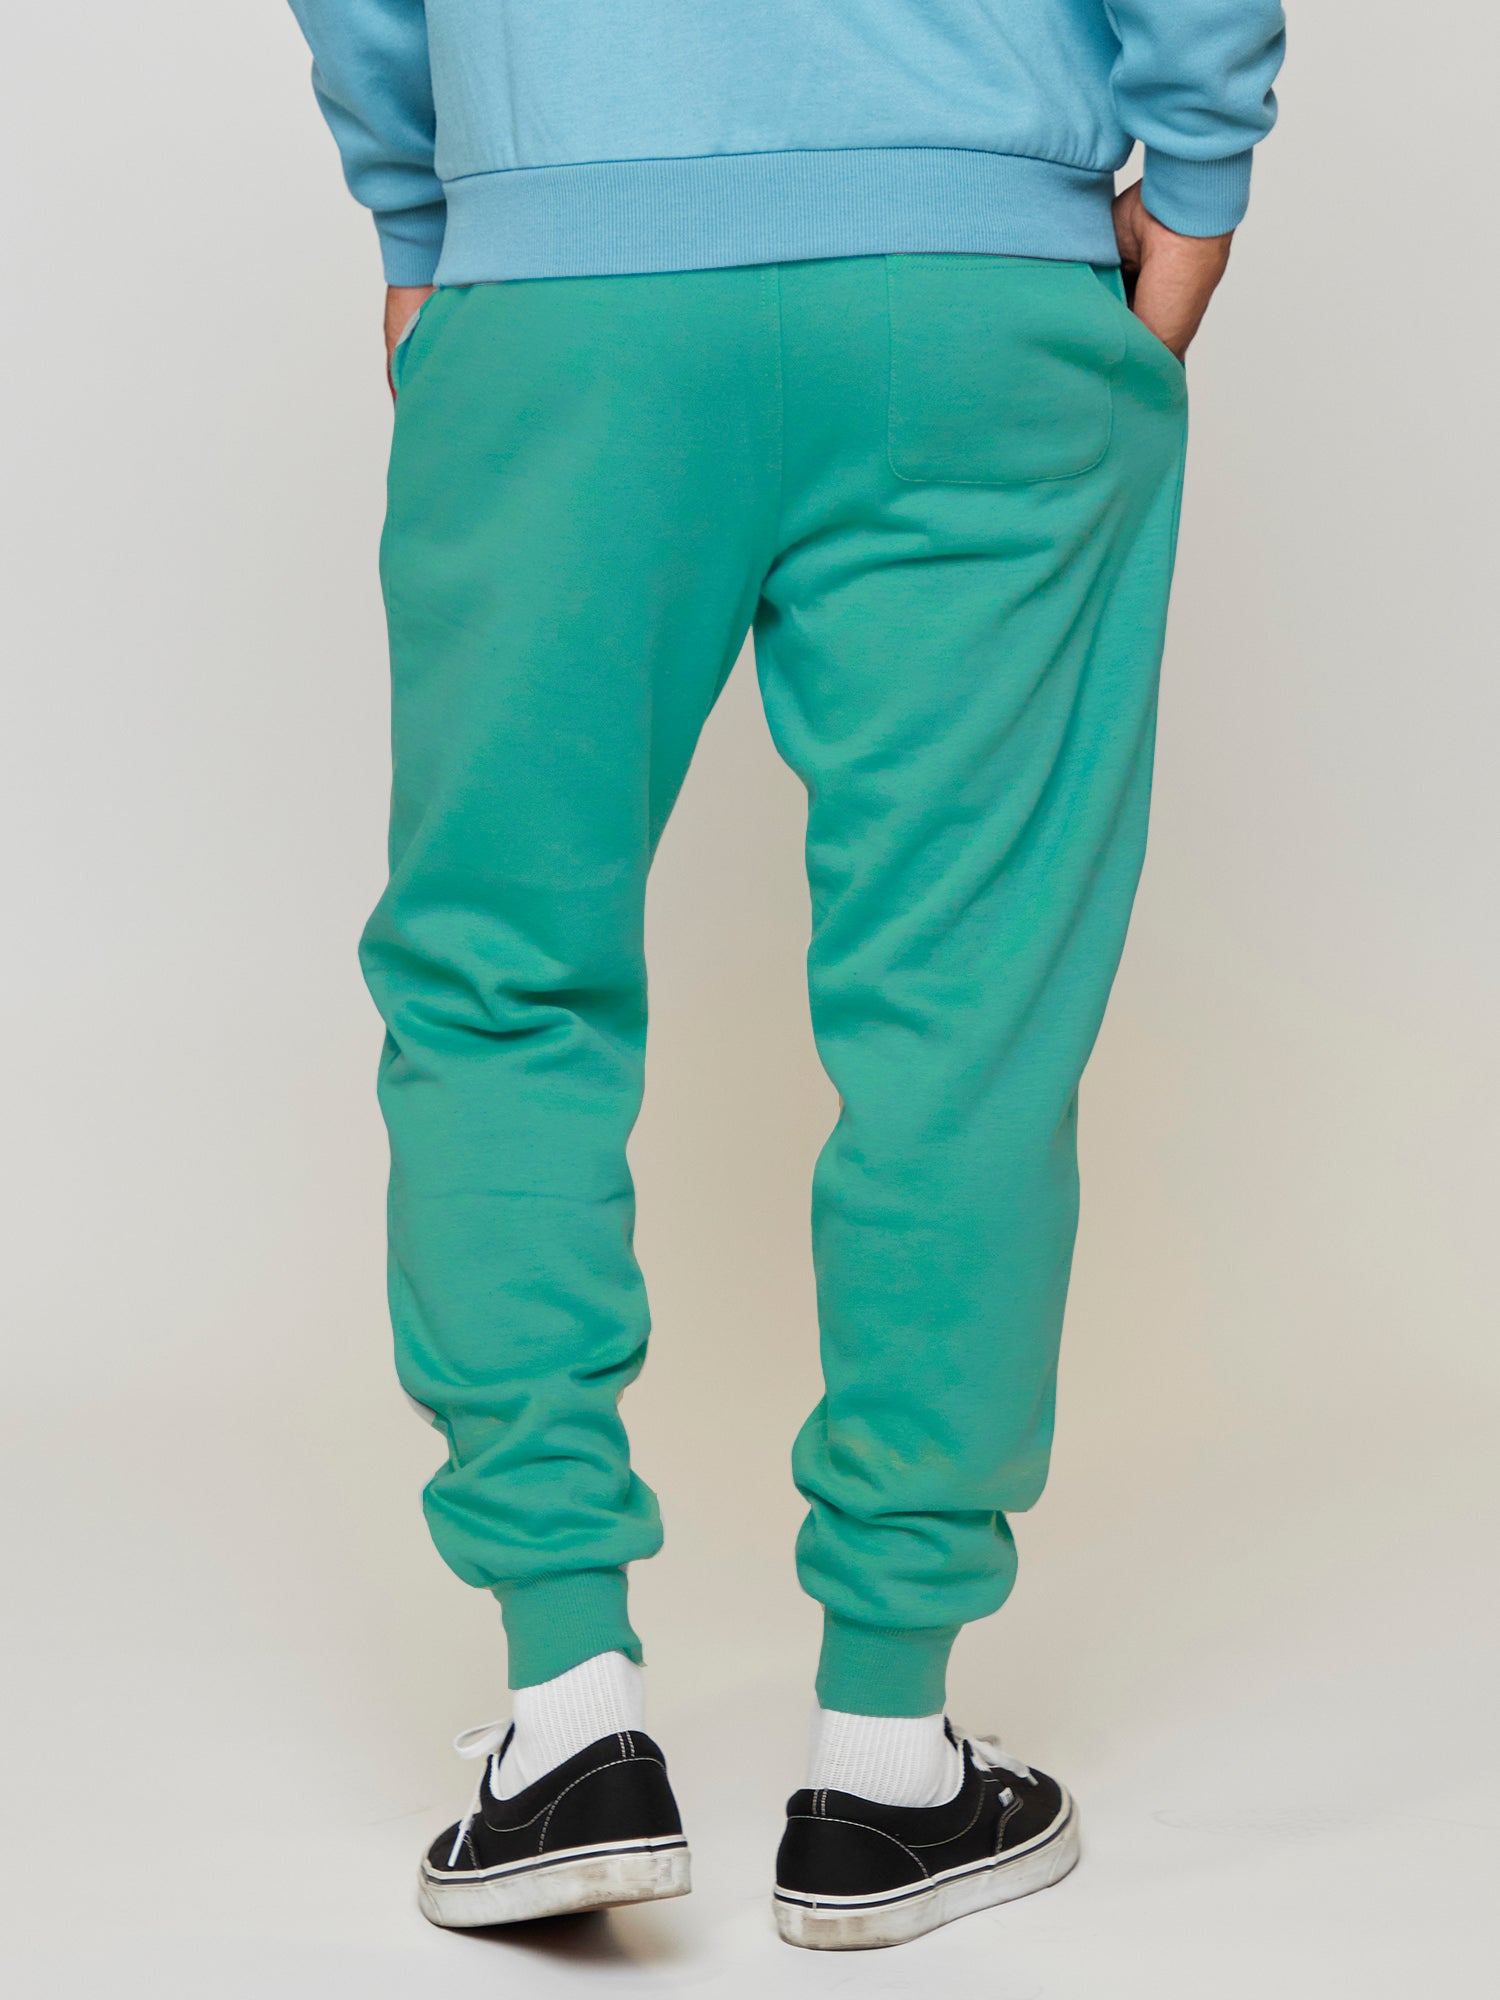 Invasion Jogger Sweatpant in Turquoise